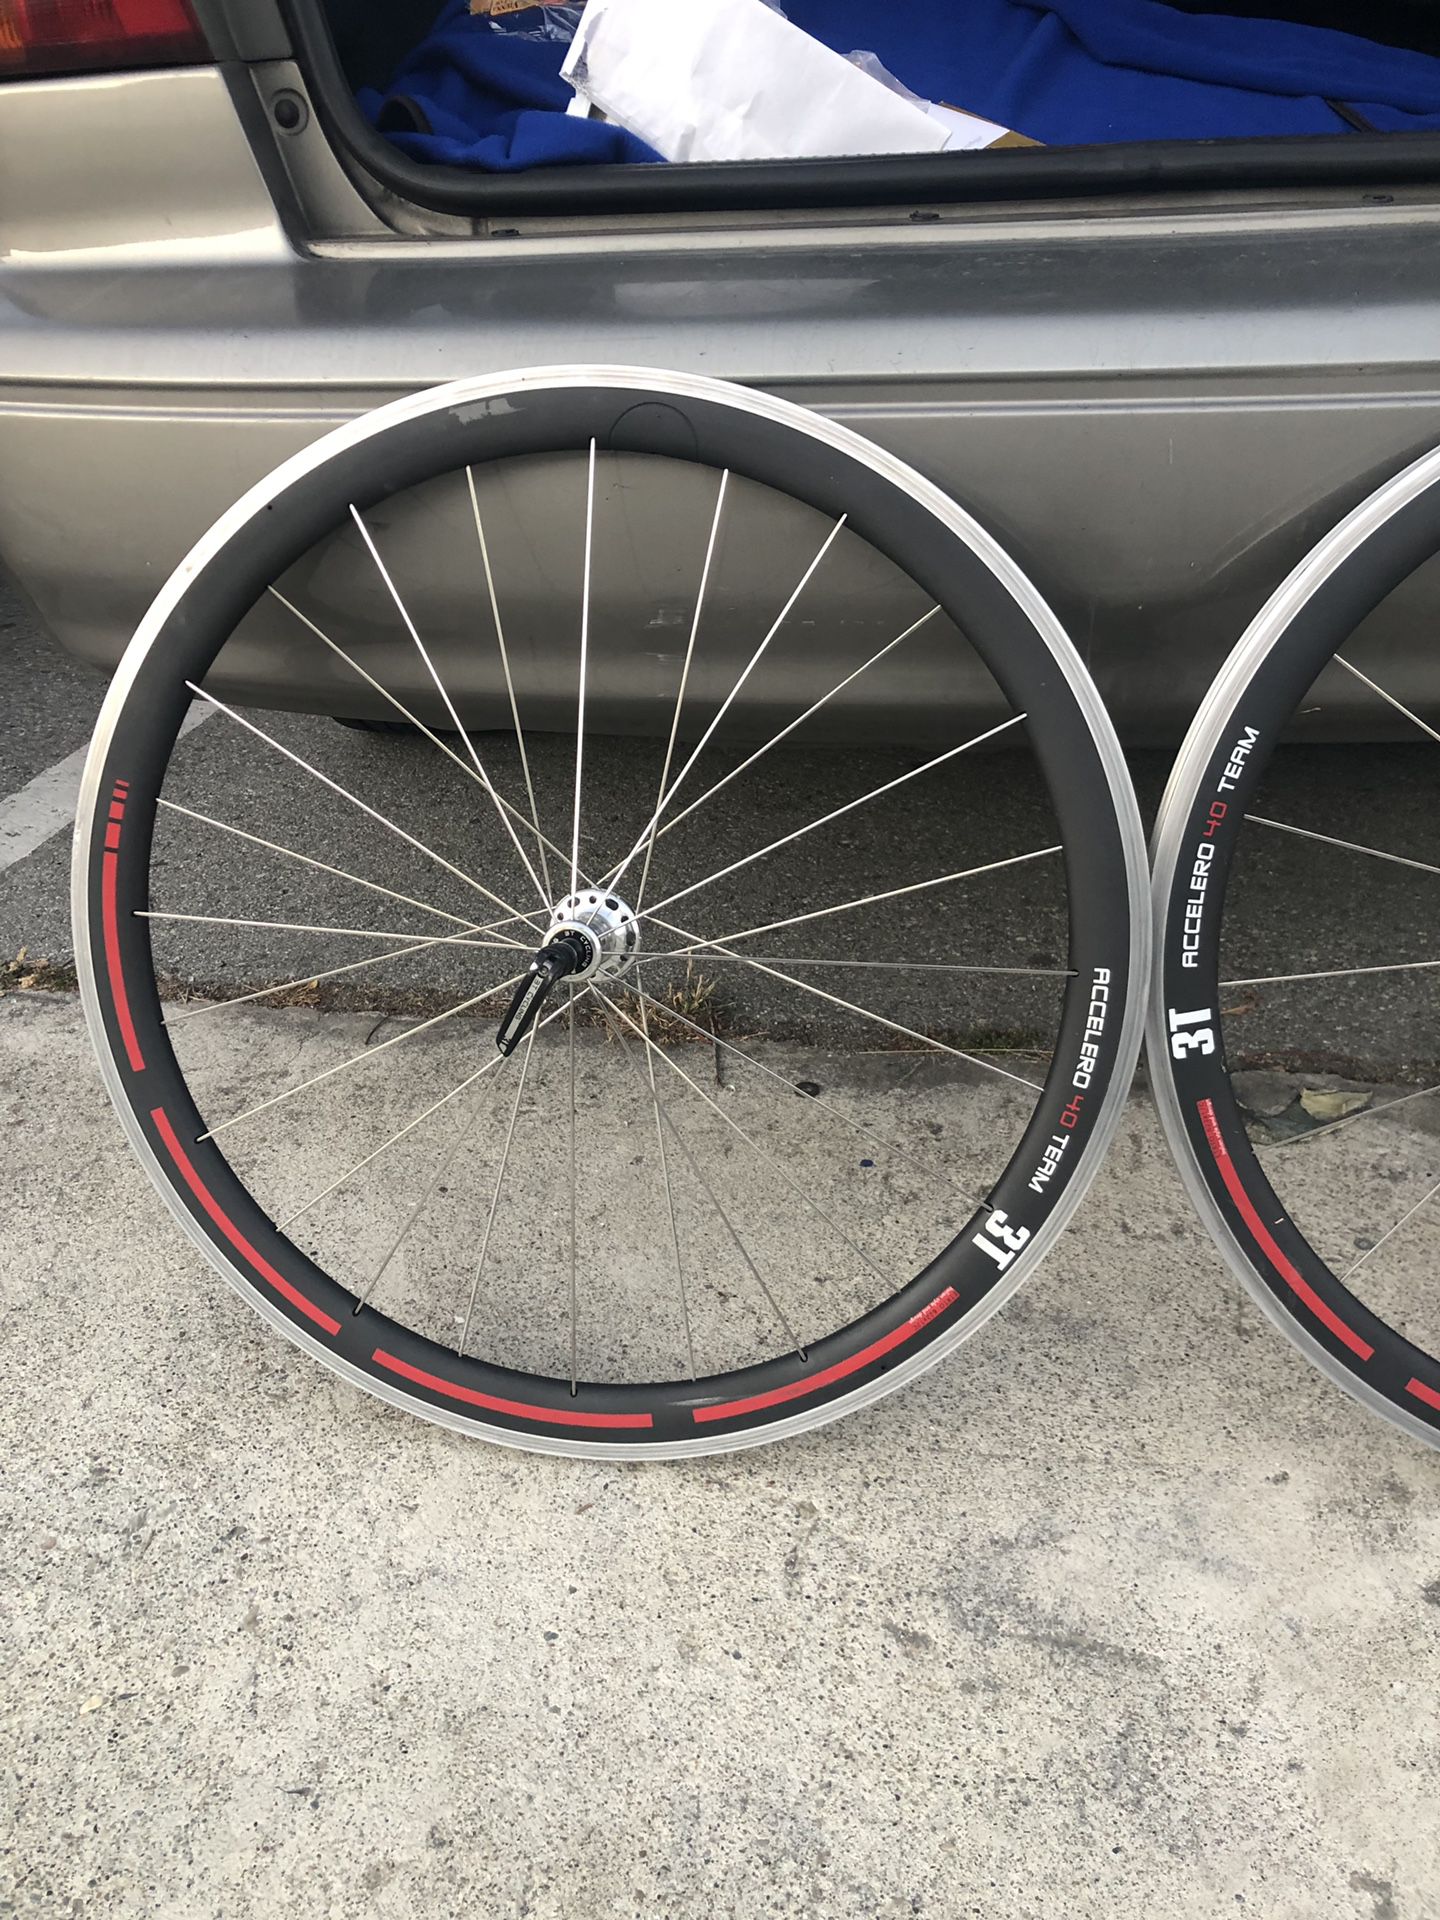 FOR SALE OR TRADE BICYCLE RIMS 3T ACCLERO TEAM 40